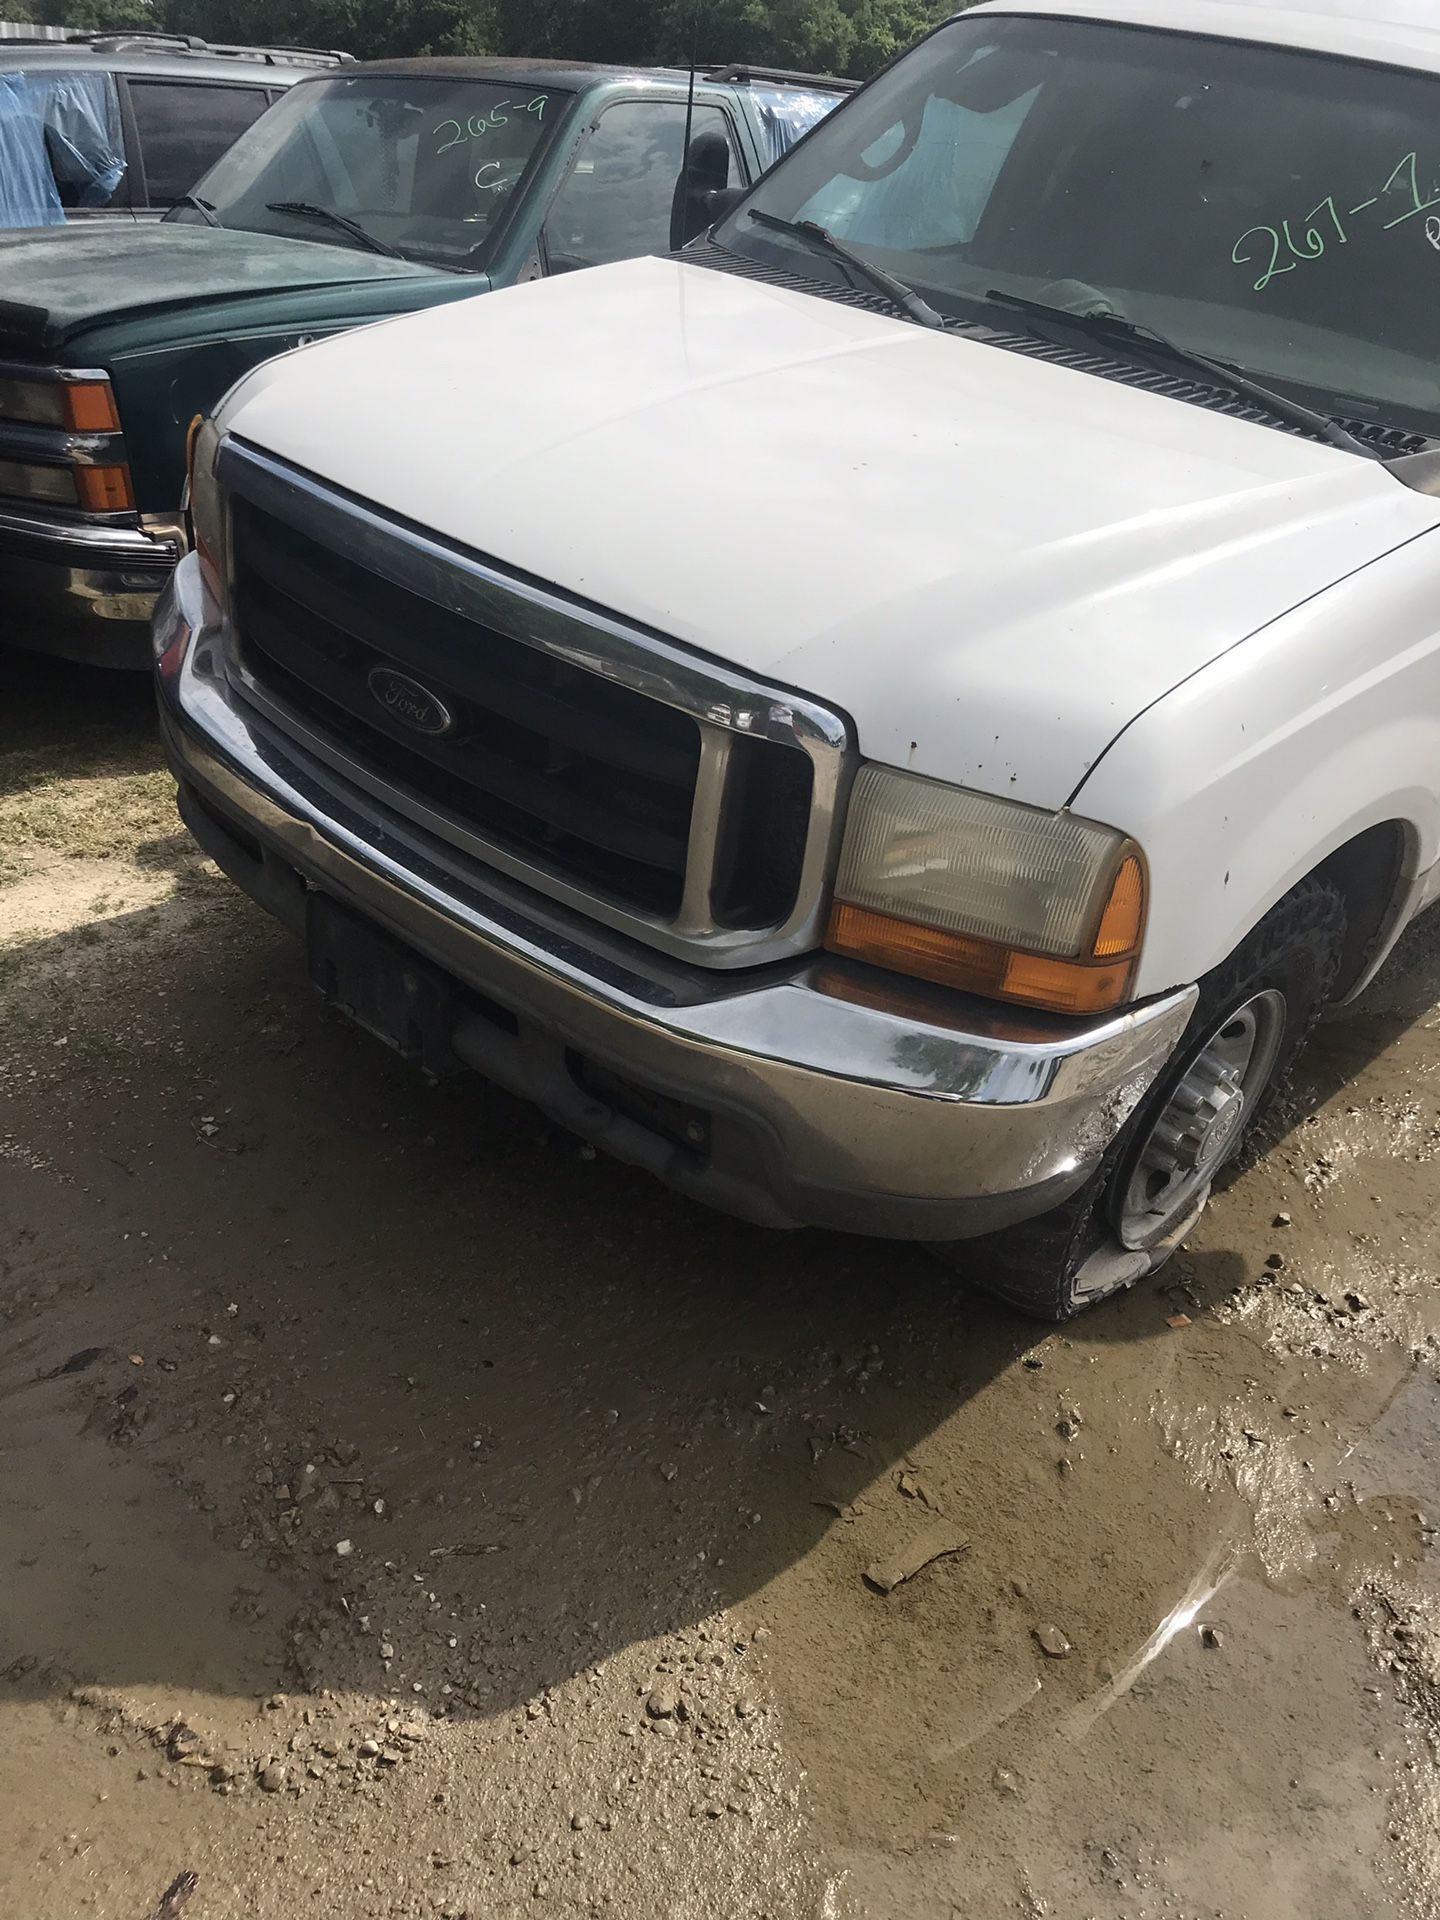 2002 f250 7.3 truck parts 10.00 and up